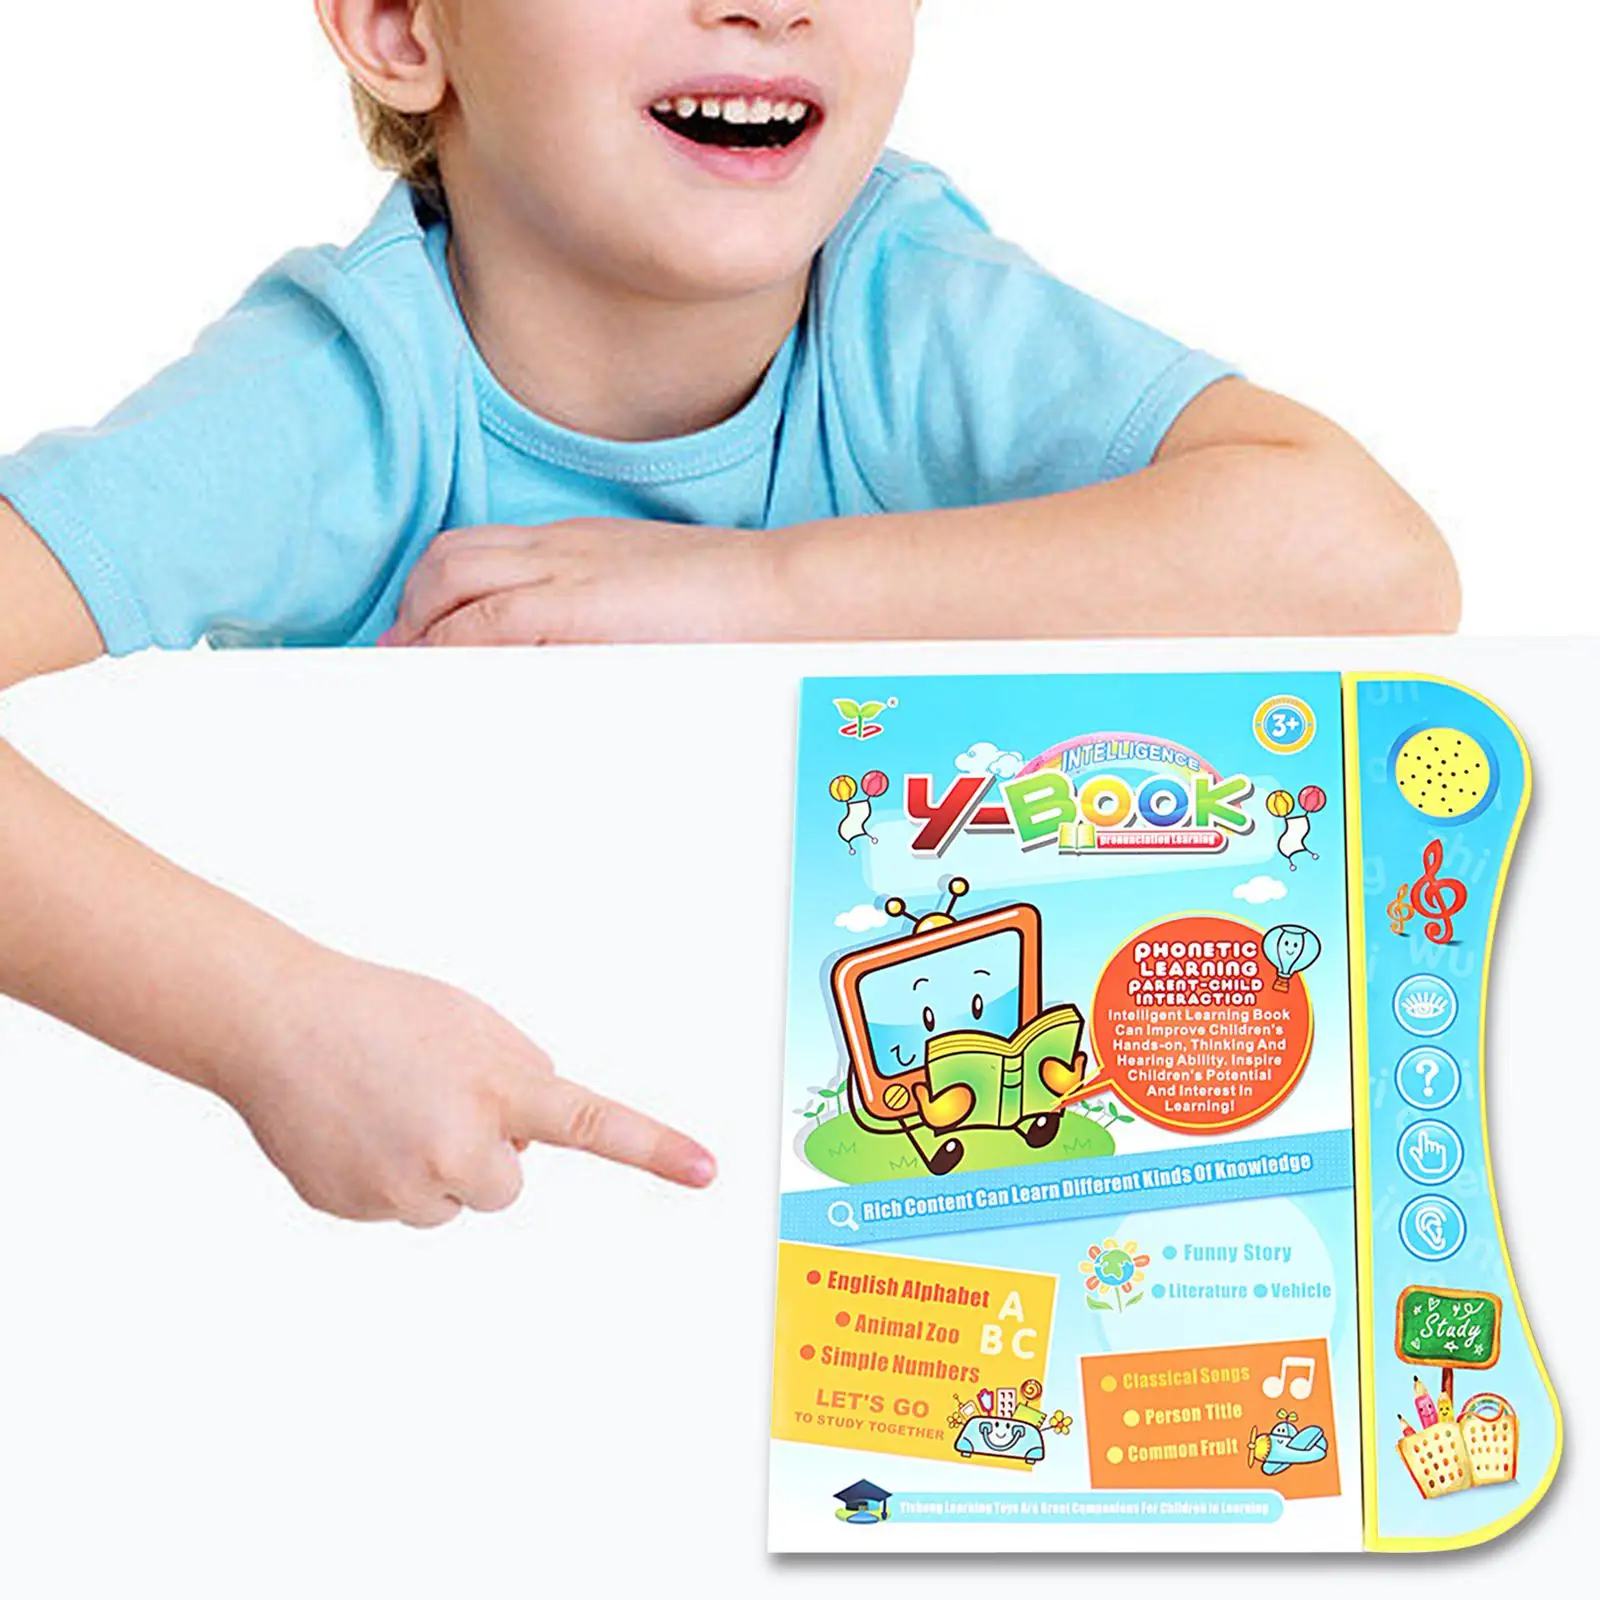 Learn english, Interactive Children sound book, Multipurpose Alphabet Learning English, interactive for Character Appellation